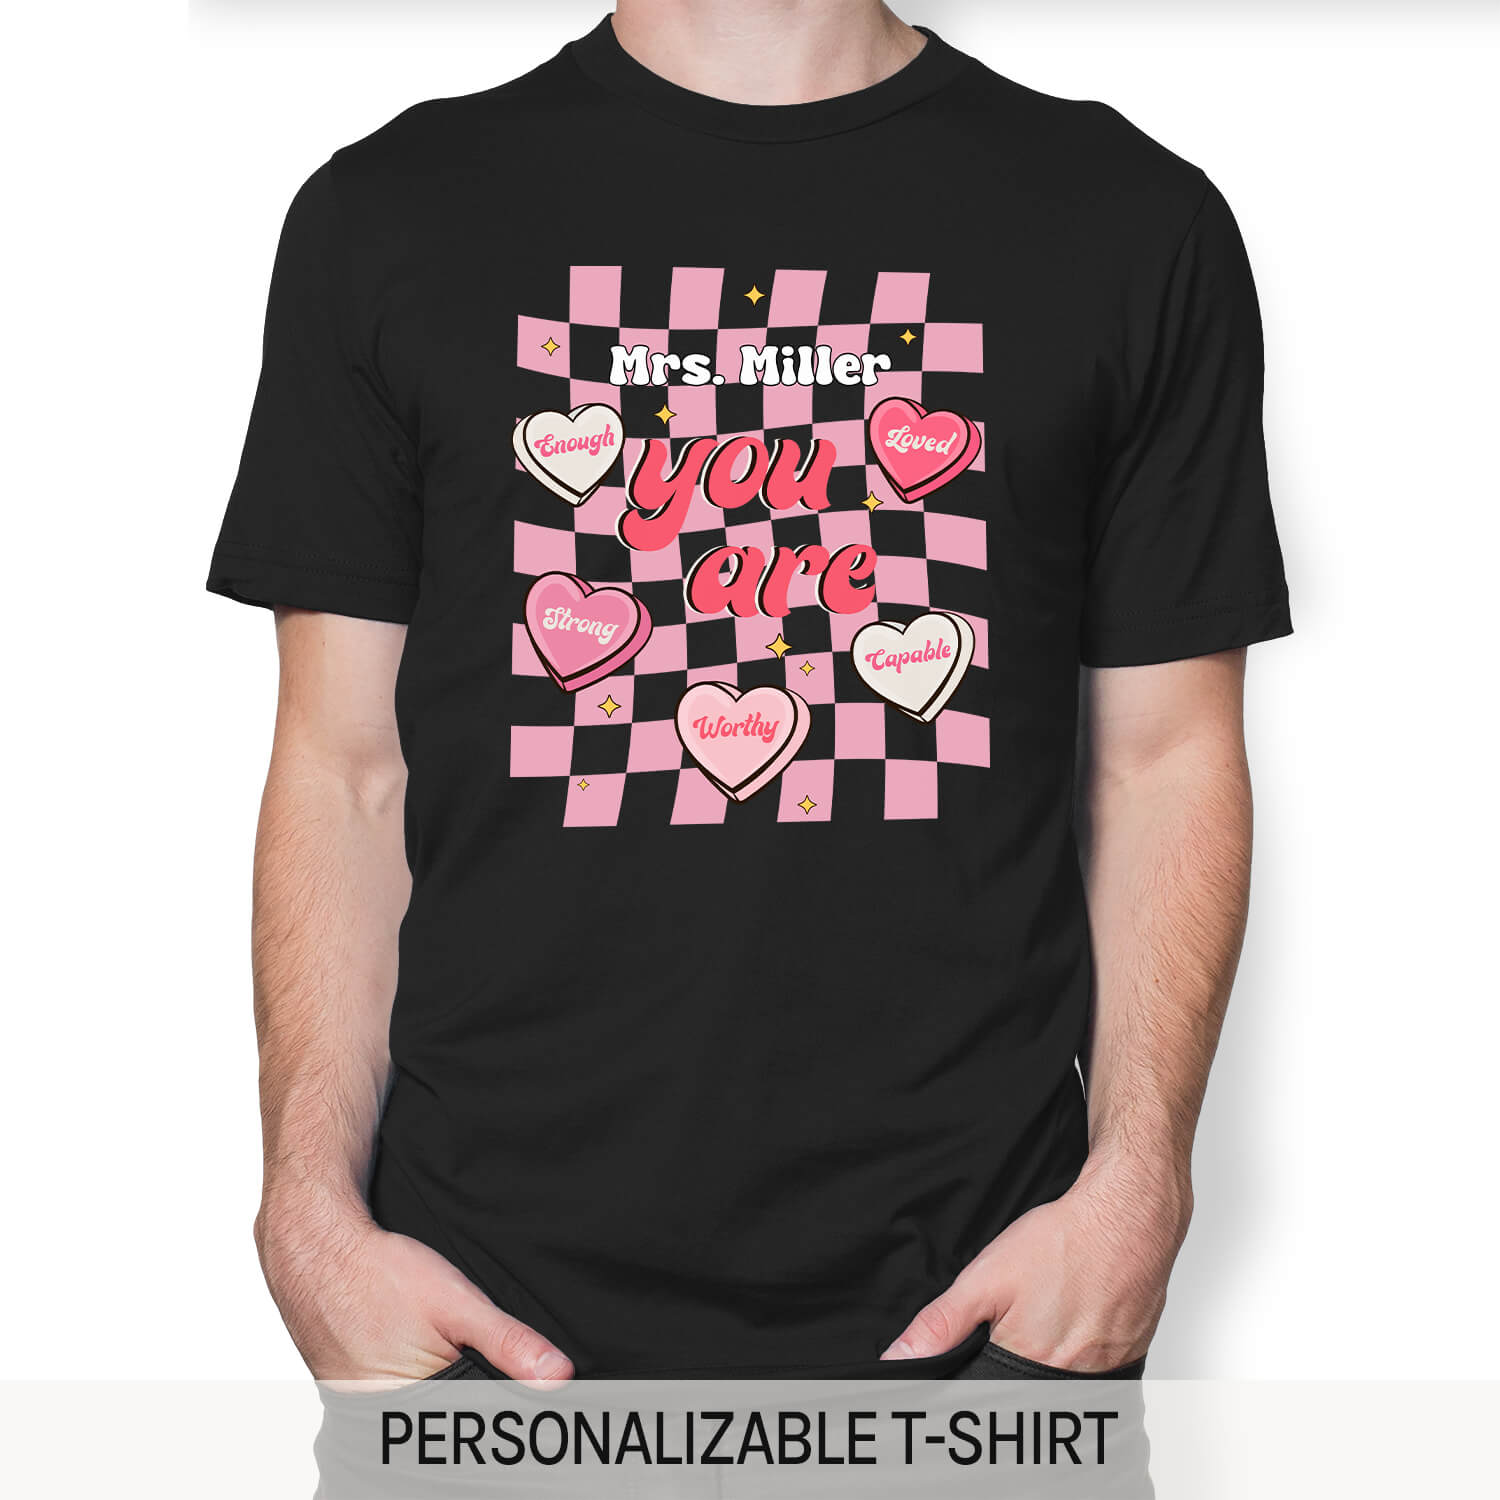 You Are - Personalized Valentine's Day gift For Teacher - Custom Tshirt - MyMindfulGifts